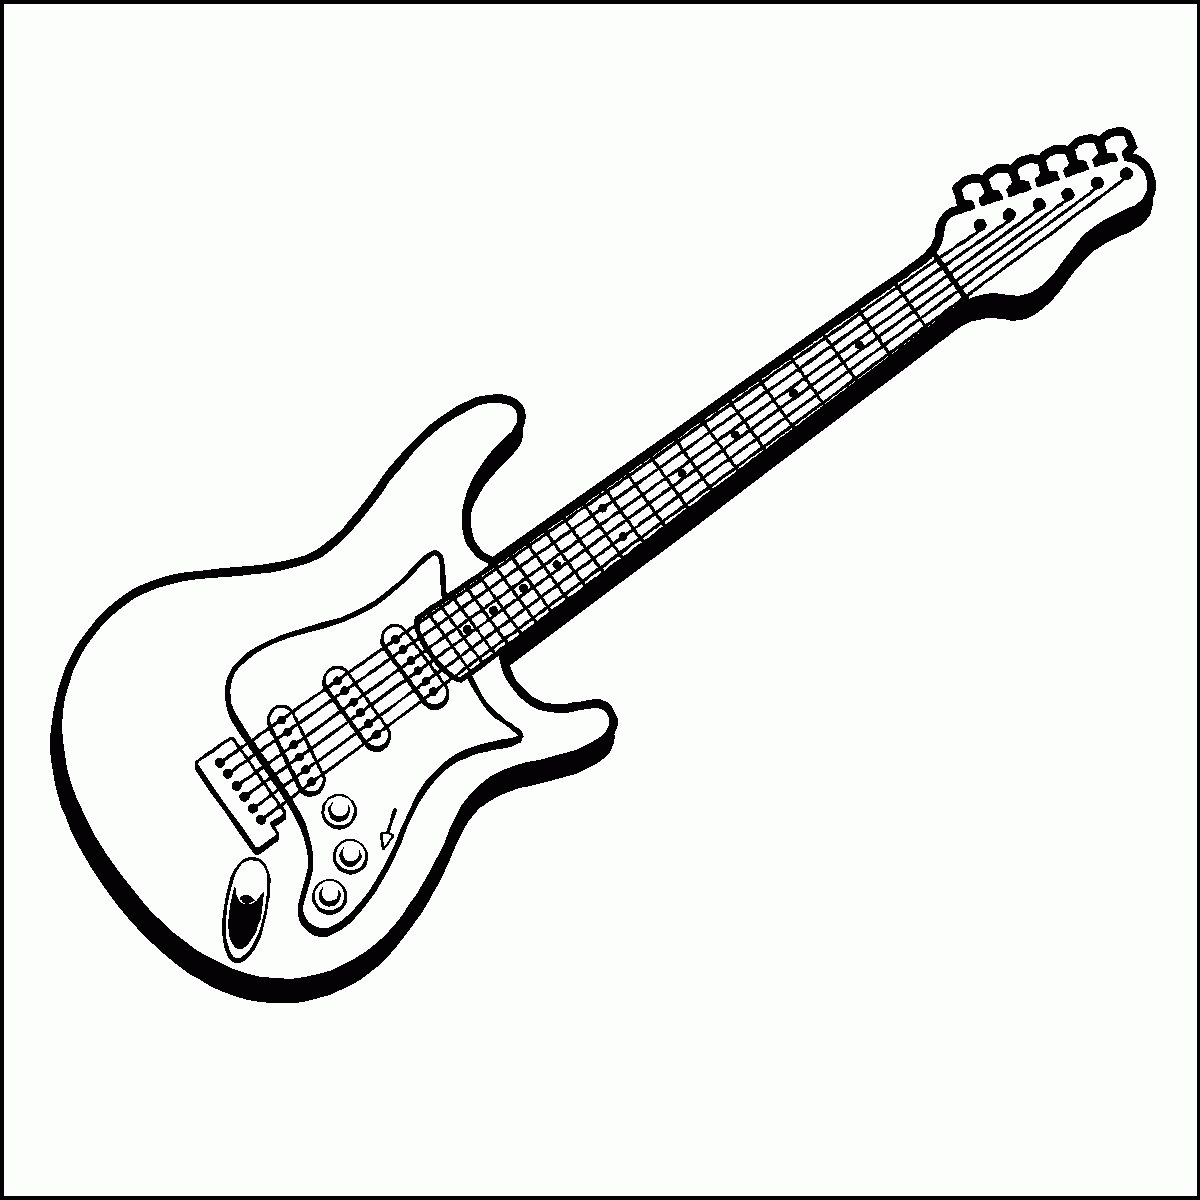 Coloring Pages Guitar - Coloring Home